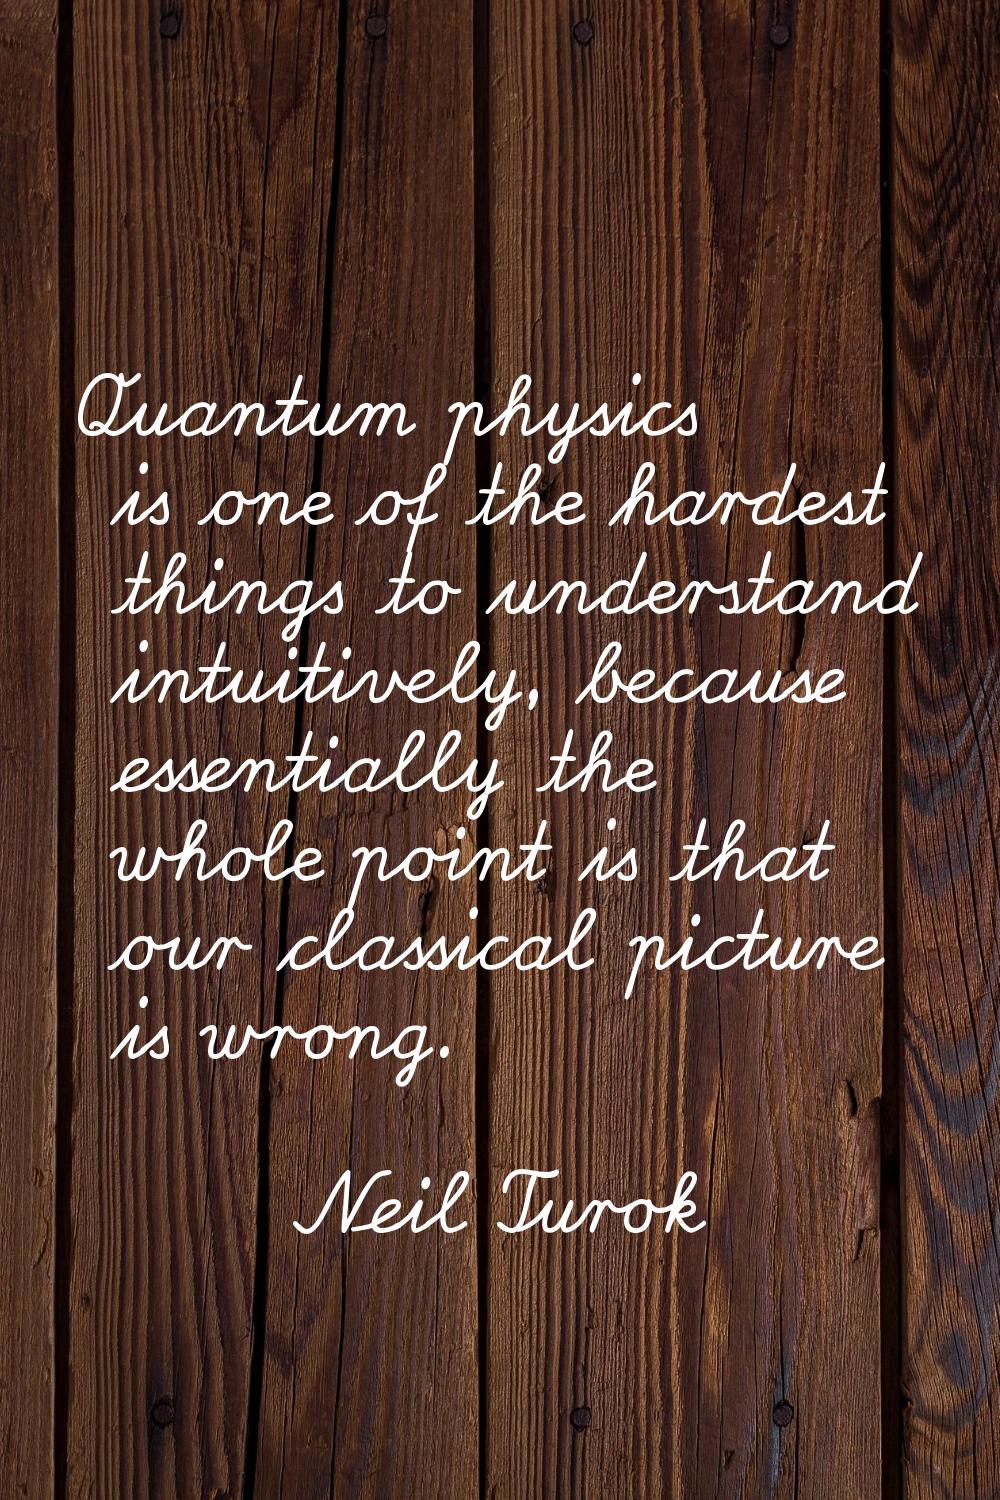 Quantum physics is one of the hardest things to understand intuitively, because essentially the who